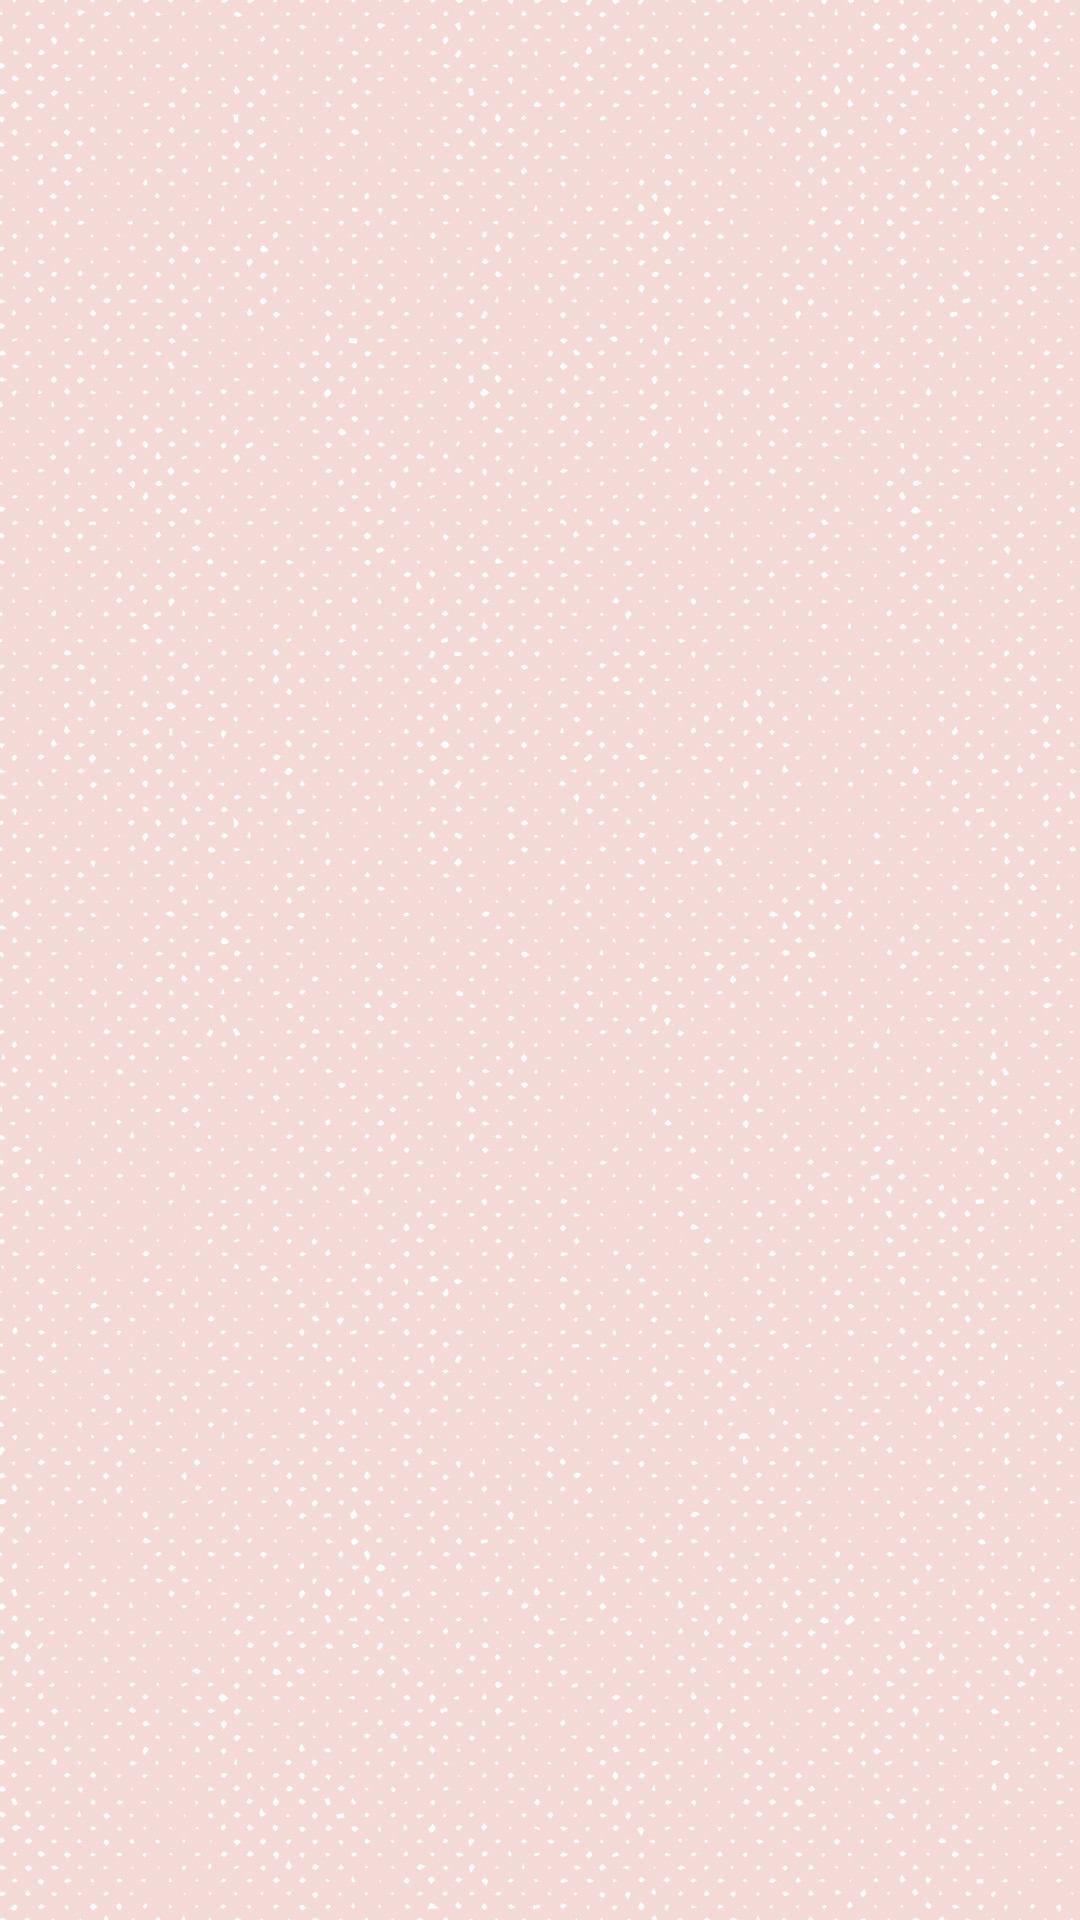 Pale Pink Iphone Wallpapers